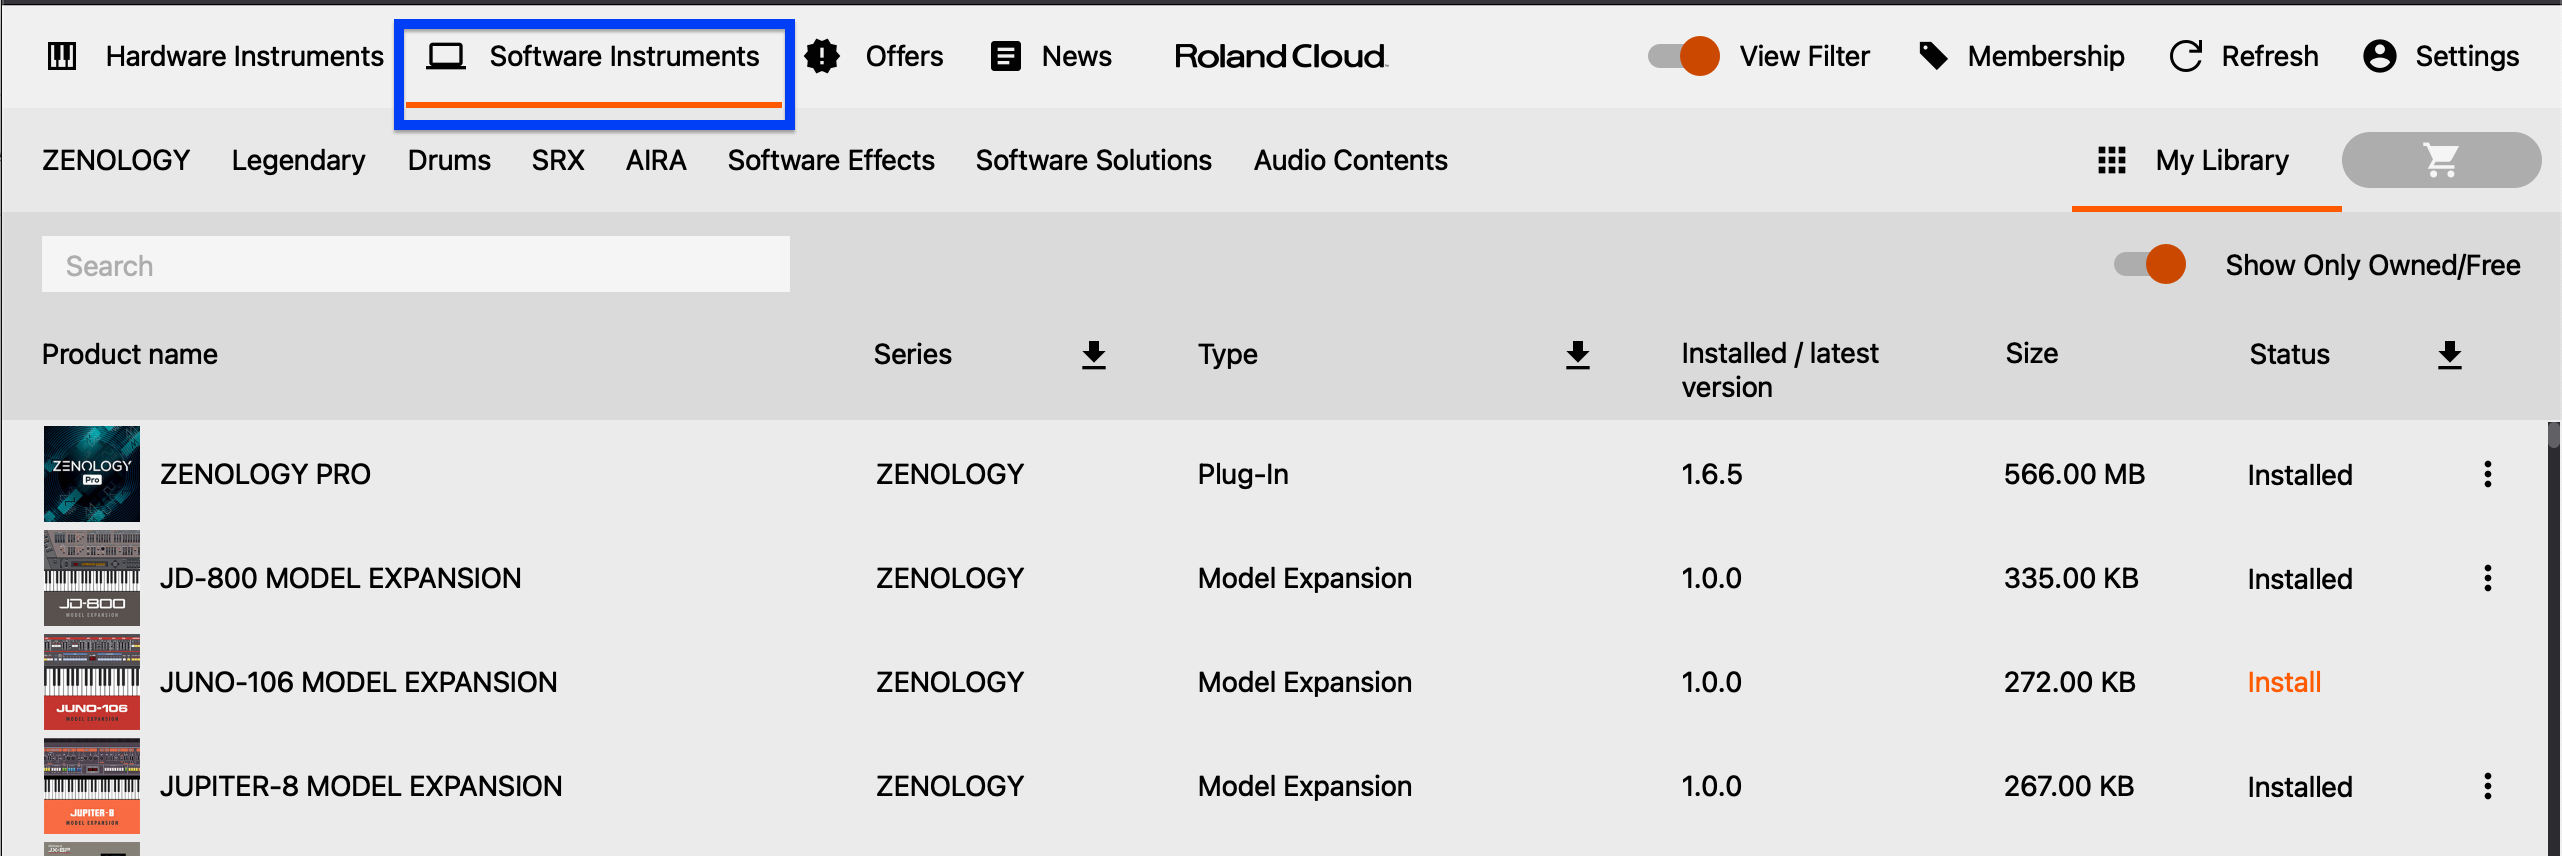 roland_cloud_manager_Software_Instruments